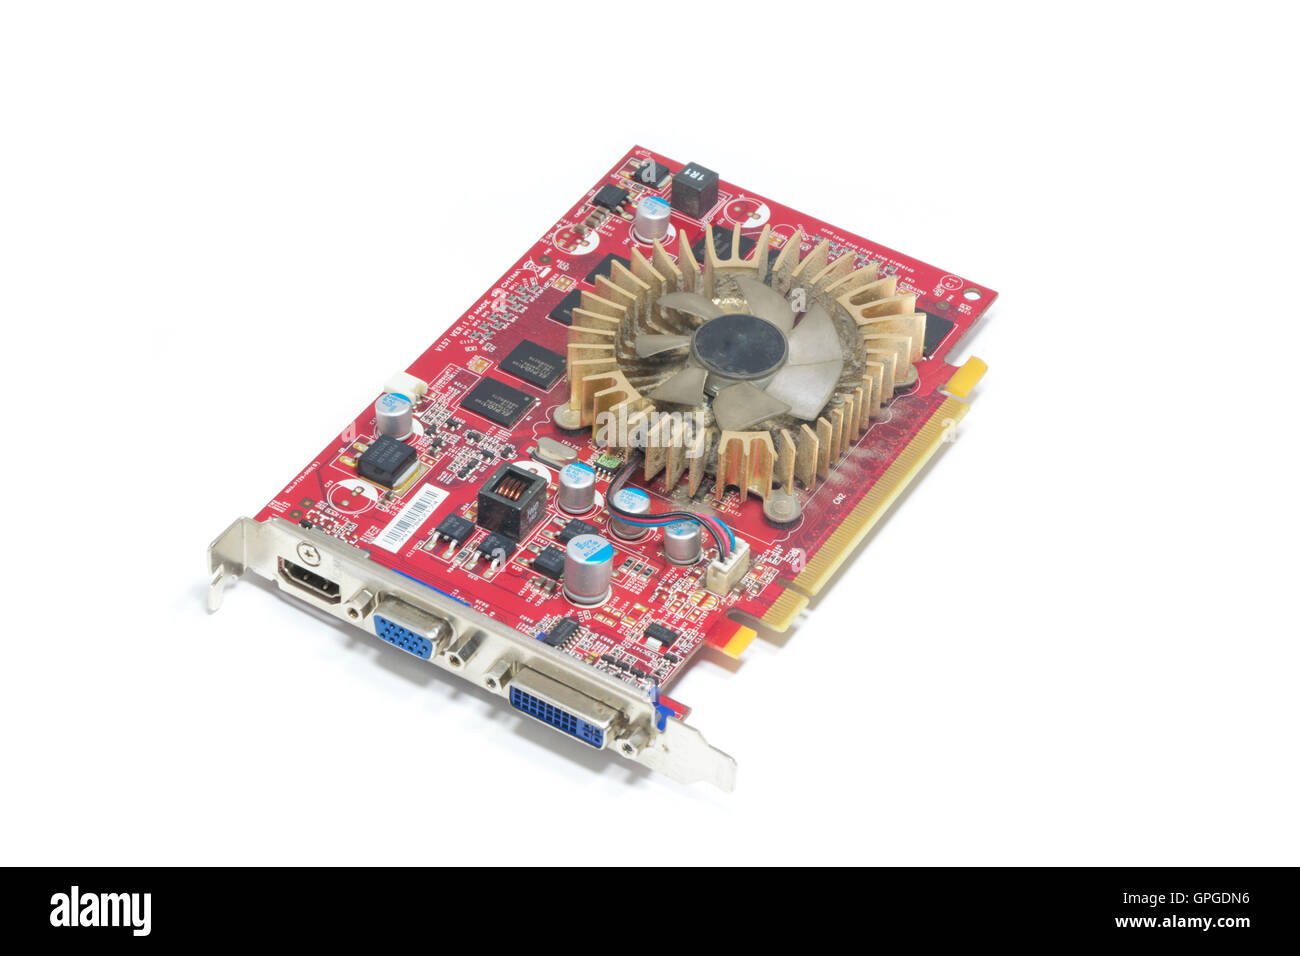 Old PC Video Card for Computer Stock Photo - Image of chip, background:  48886198